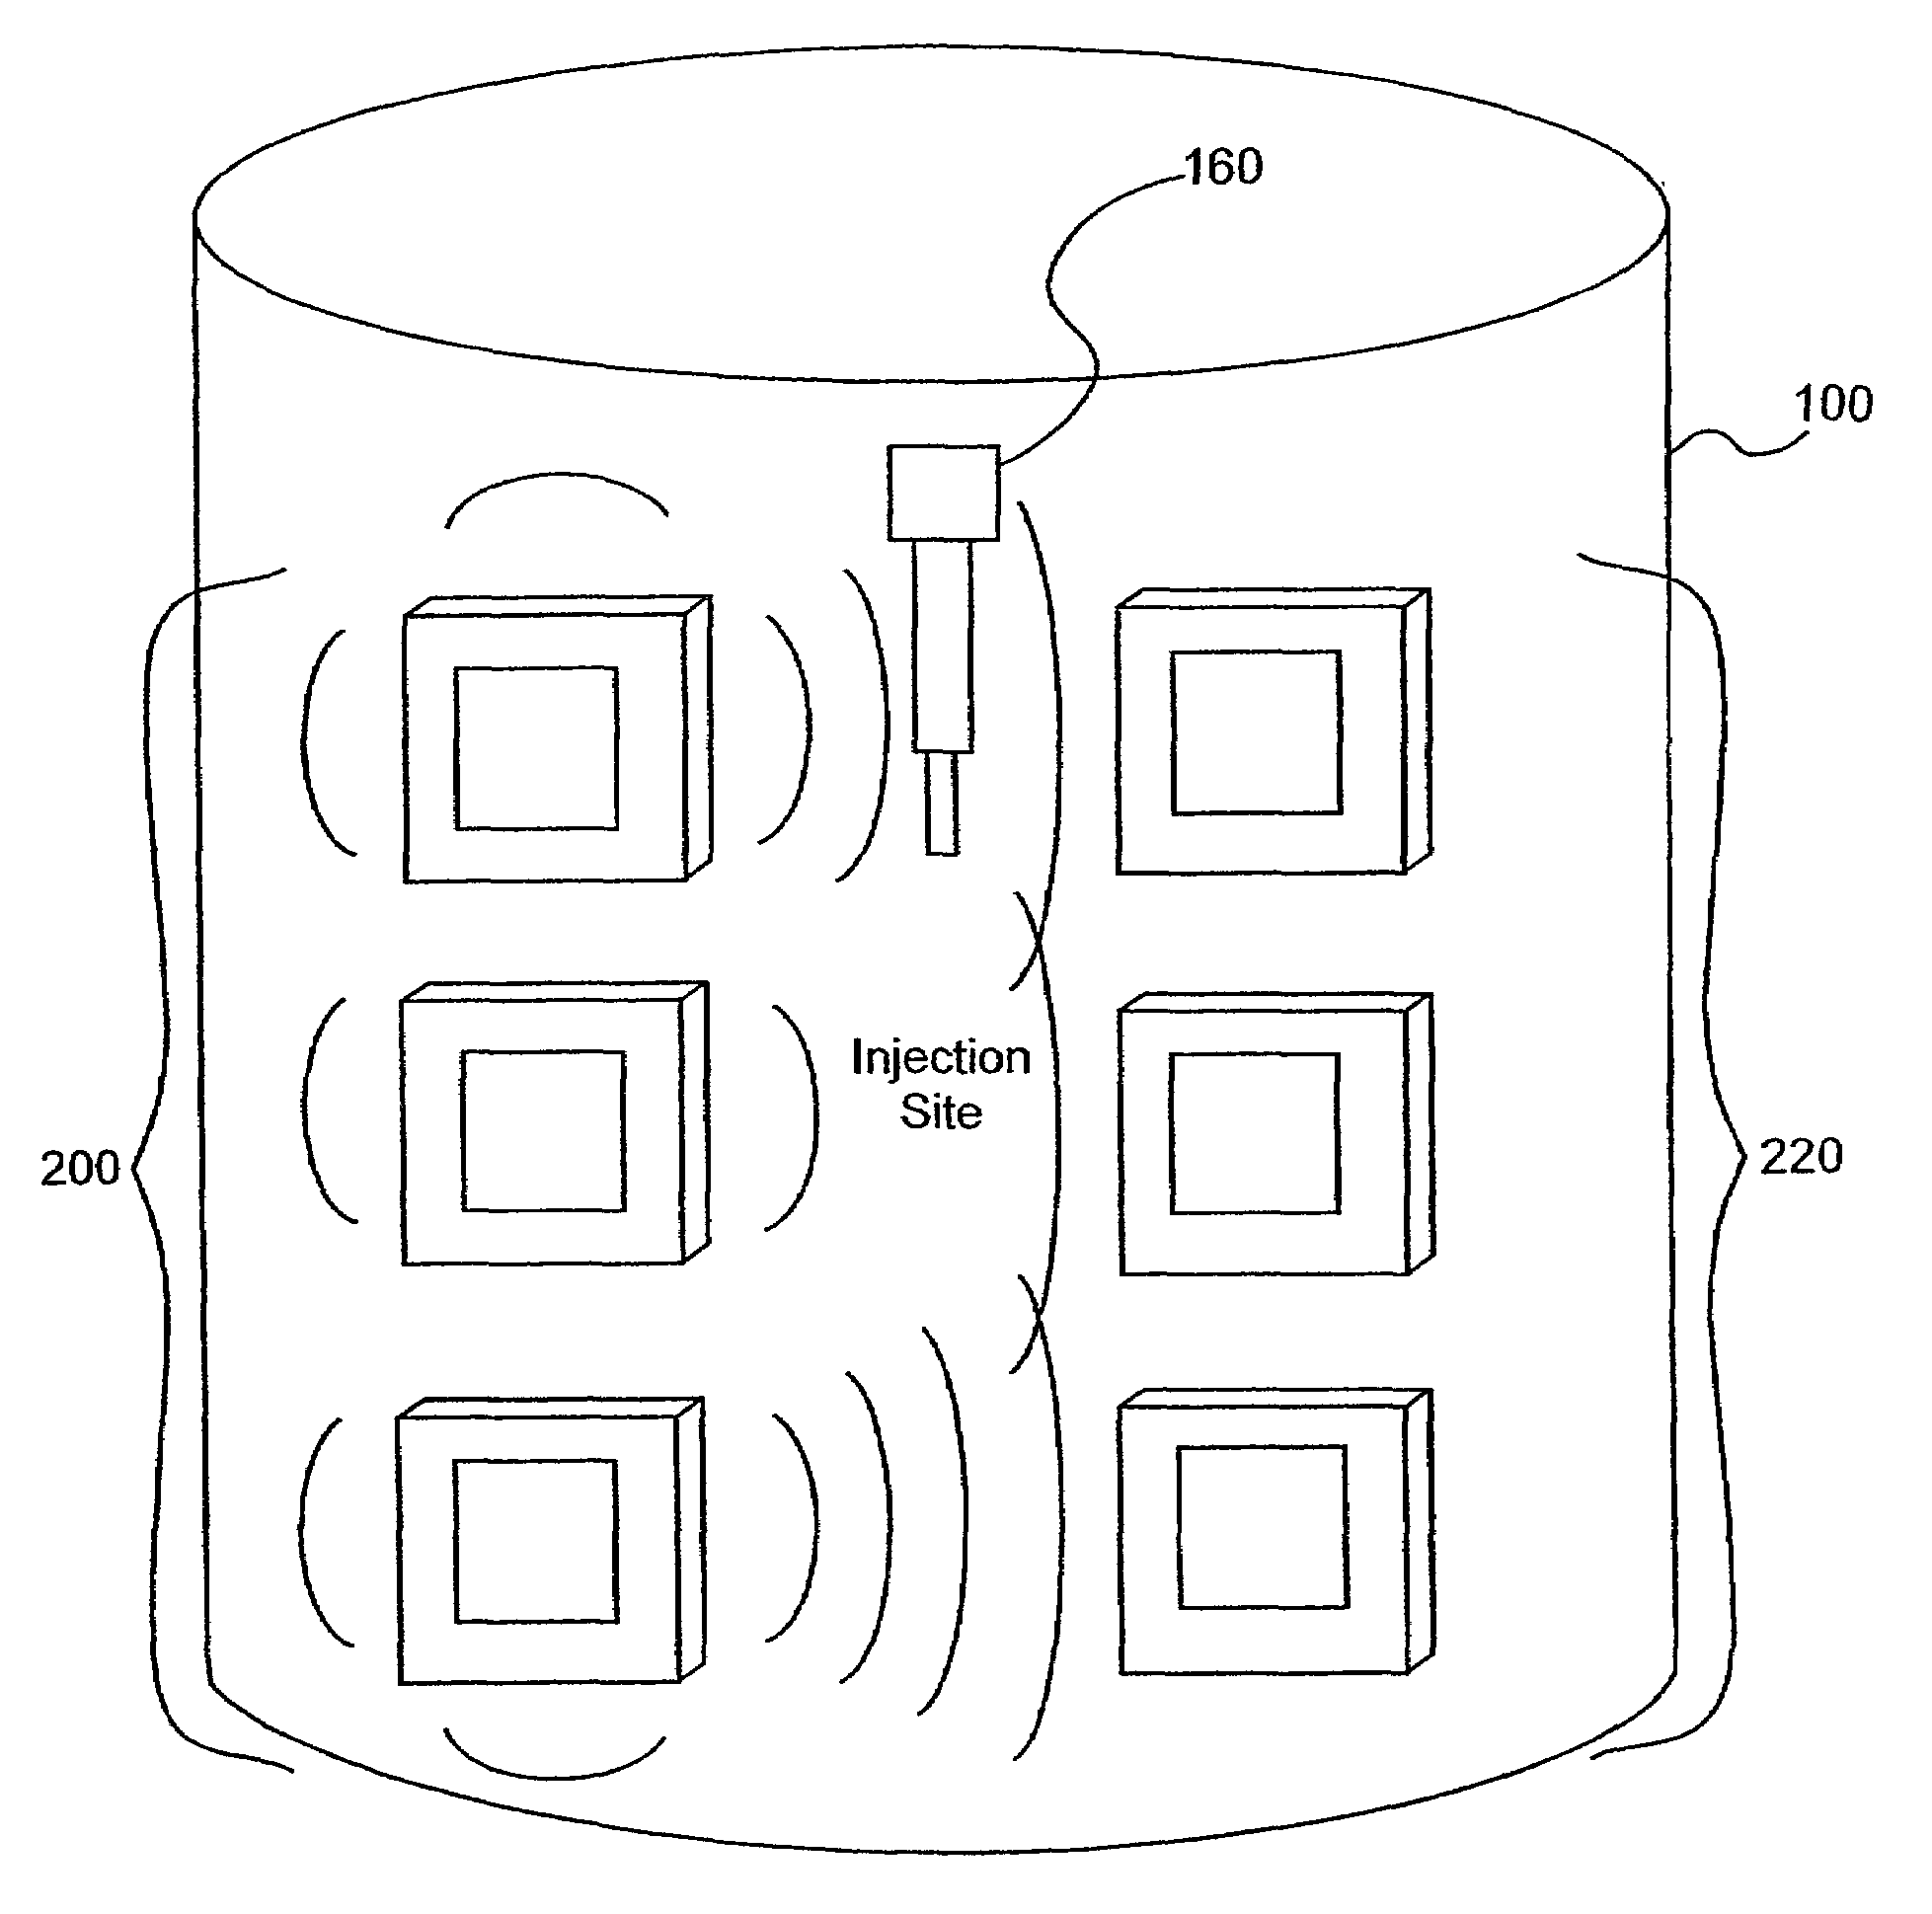 Electromagnetic sensors for biological tissue applications and methods for their use